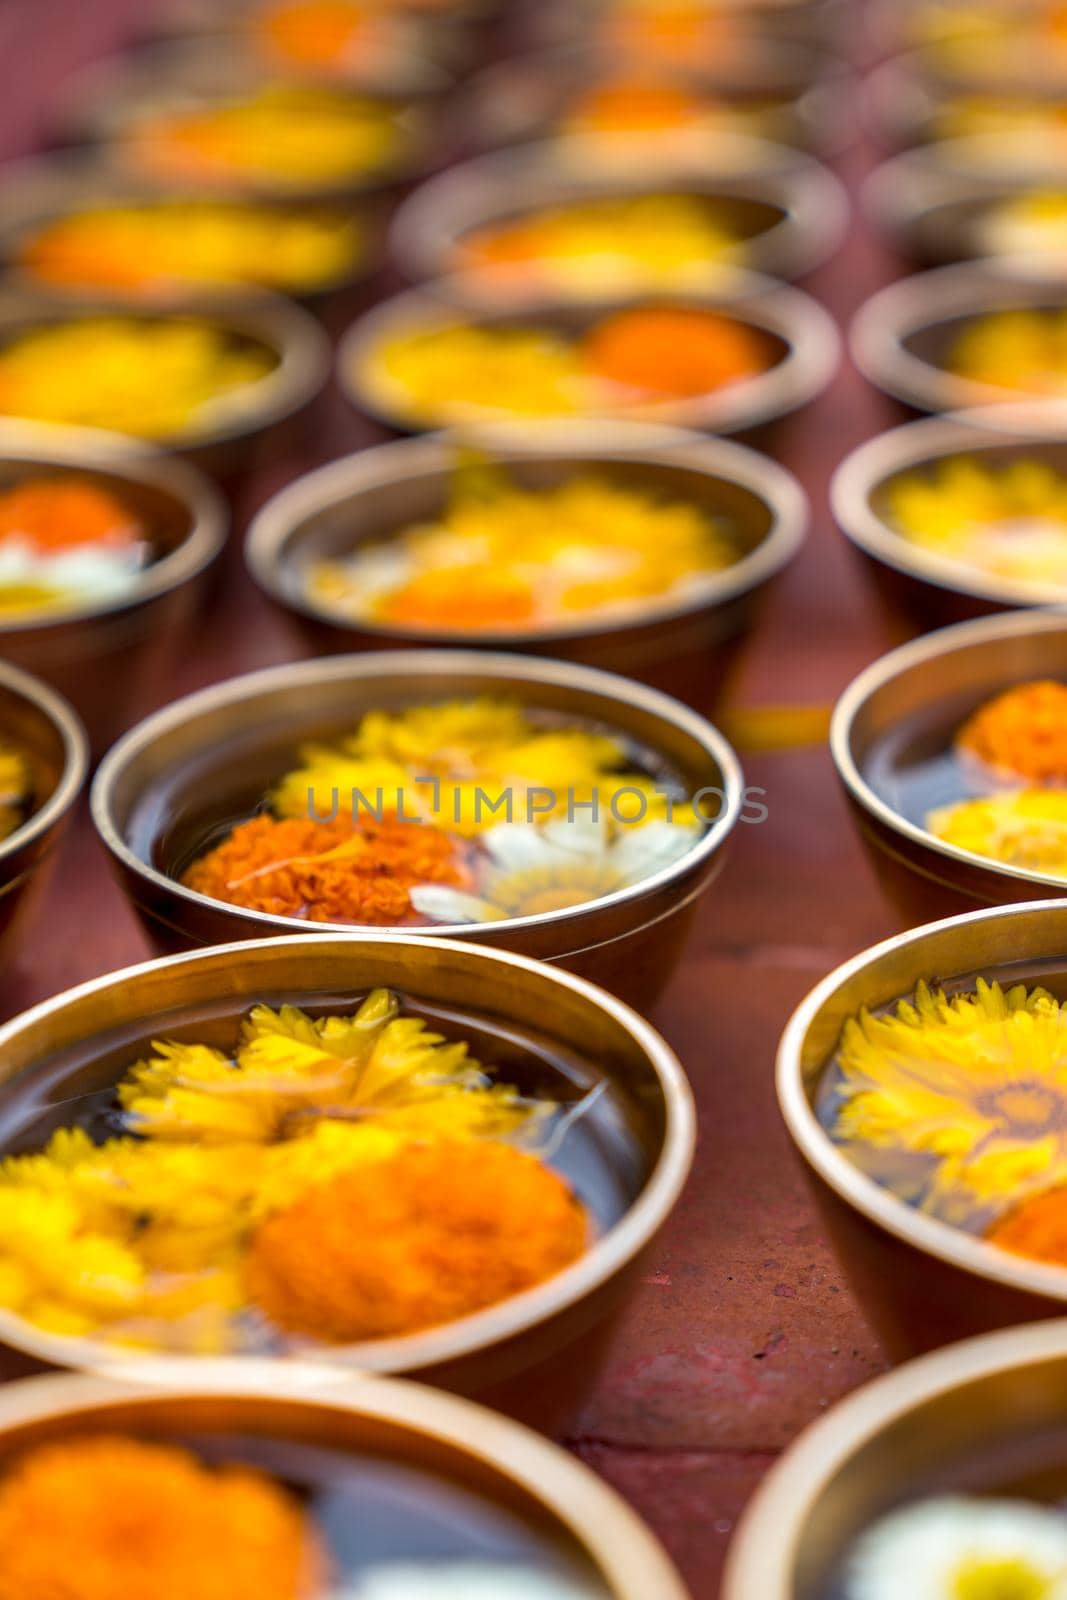 Buddhist flower offerings or gifts in bowls and rows by Arsgera